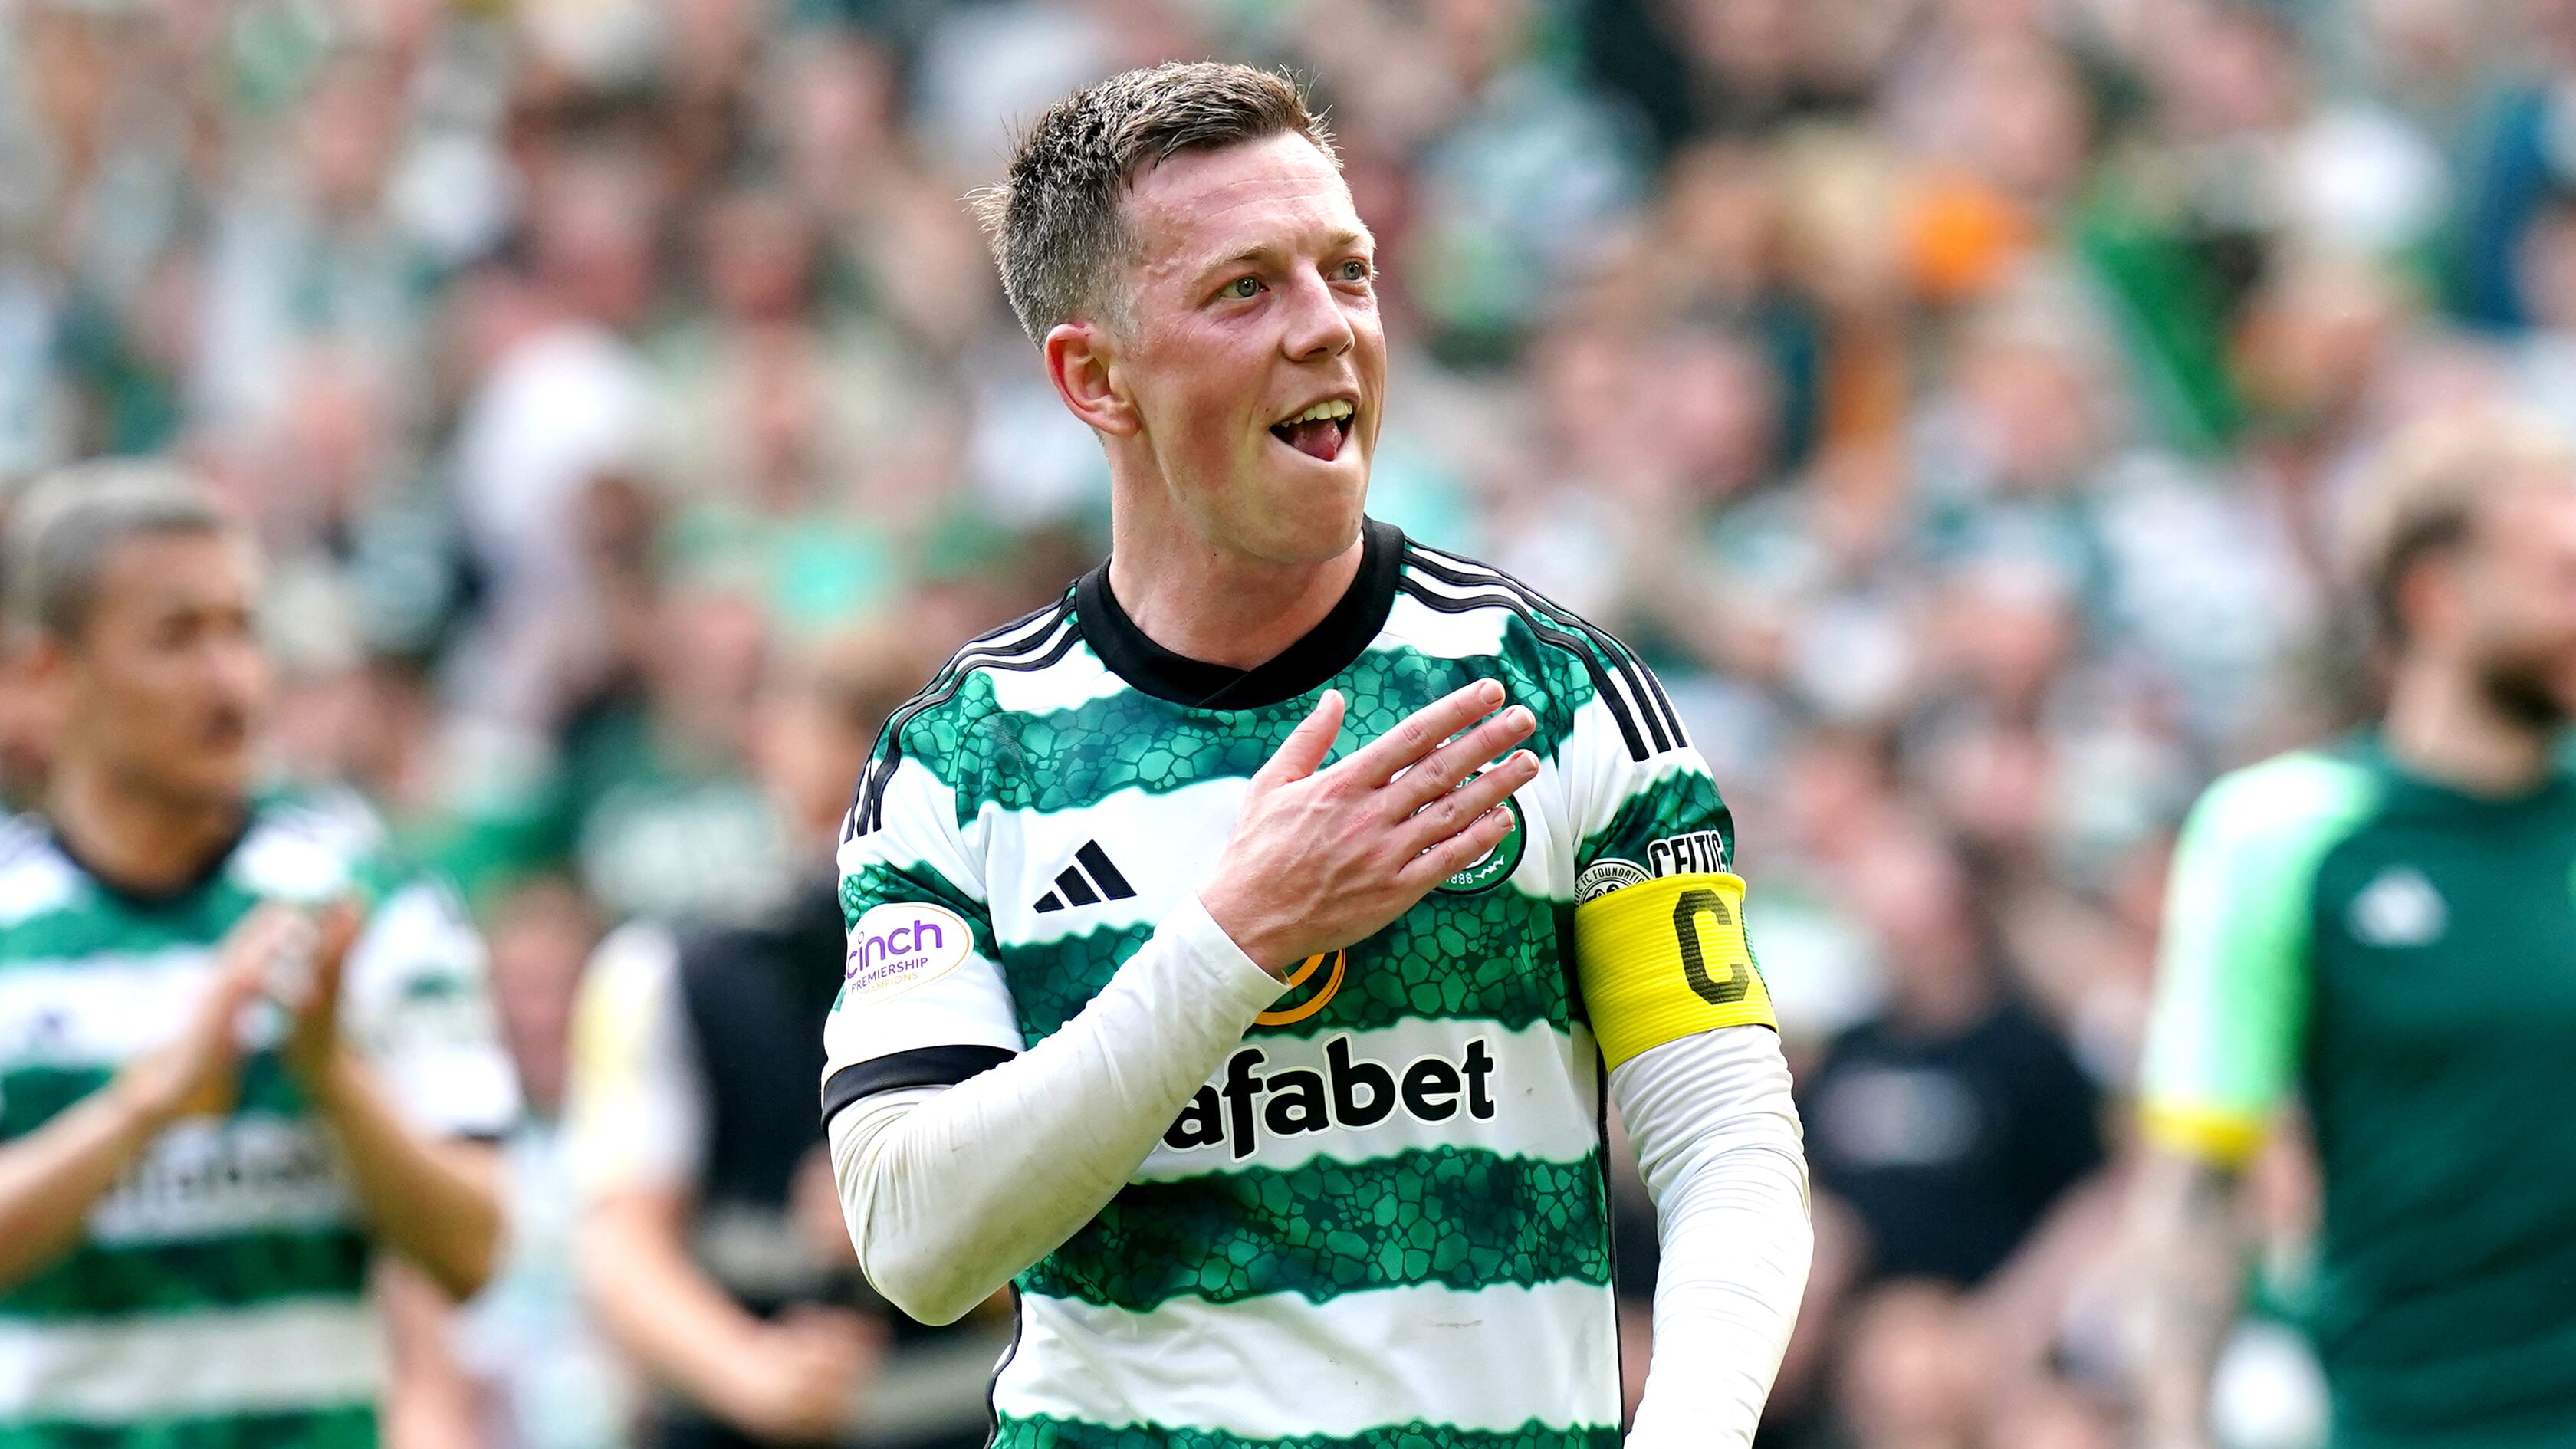 The Celtic captain is determined to secure another trophy